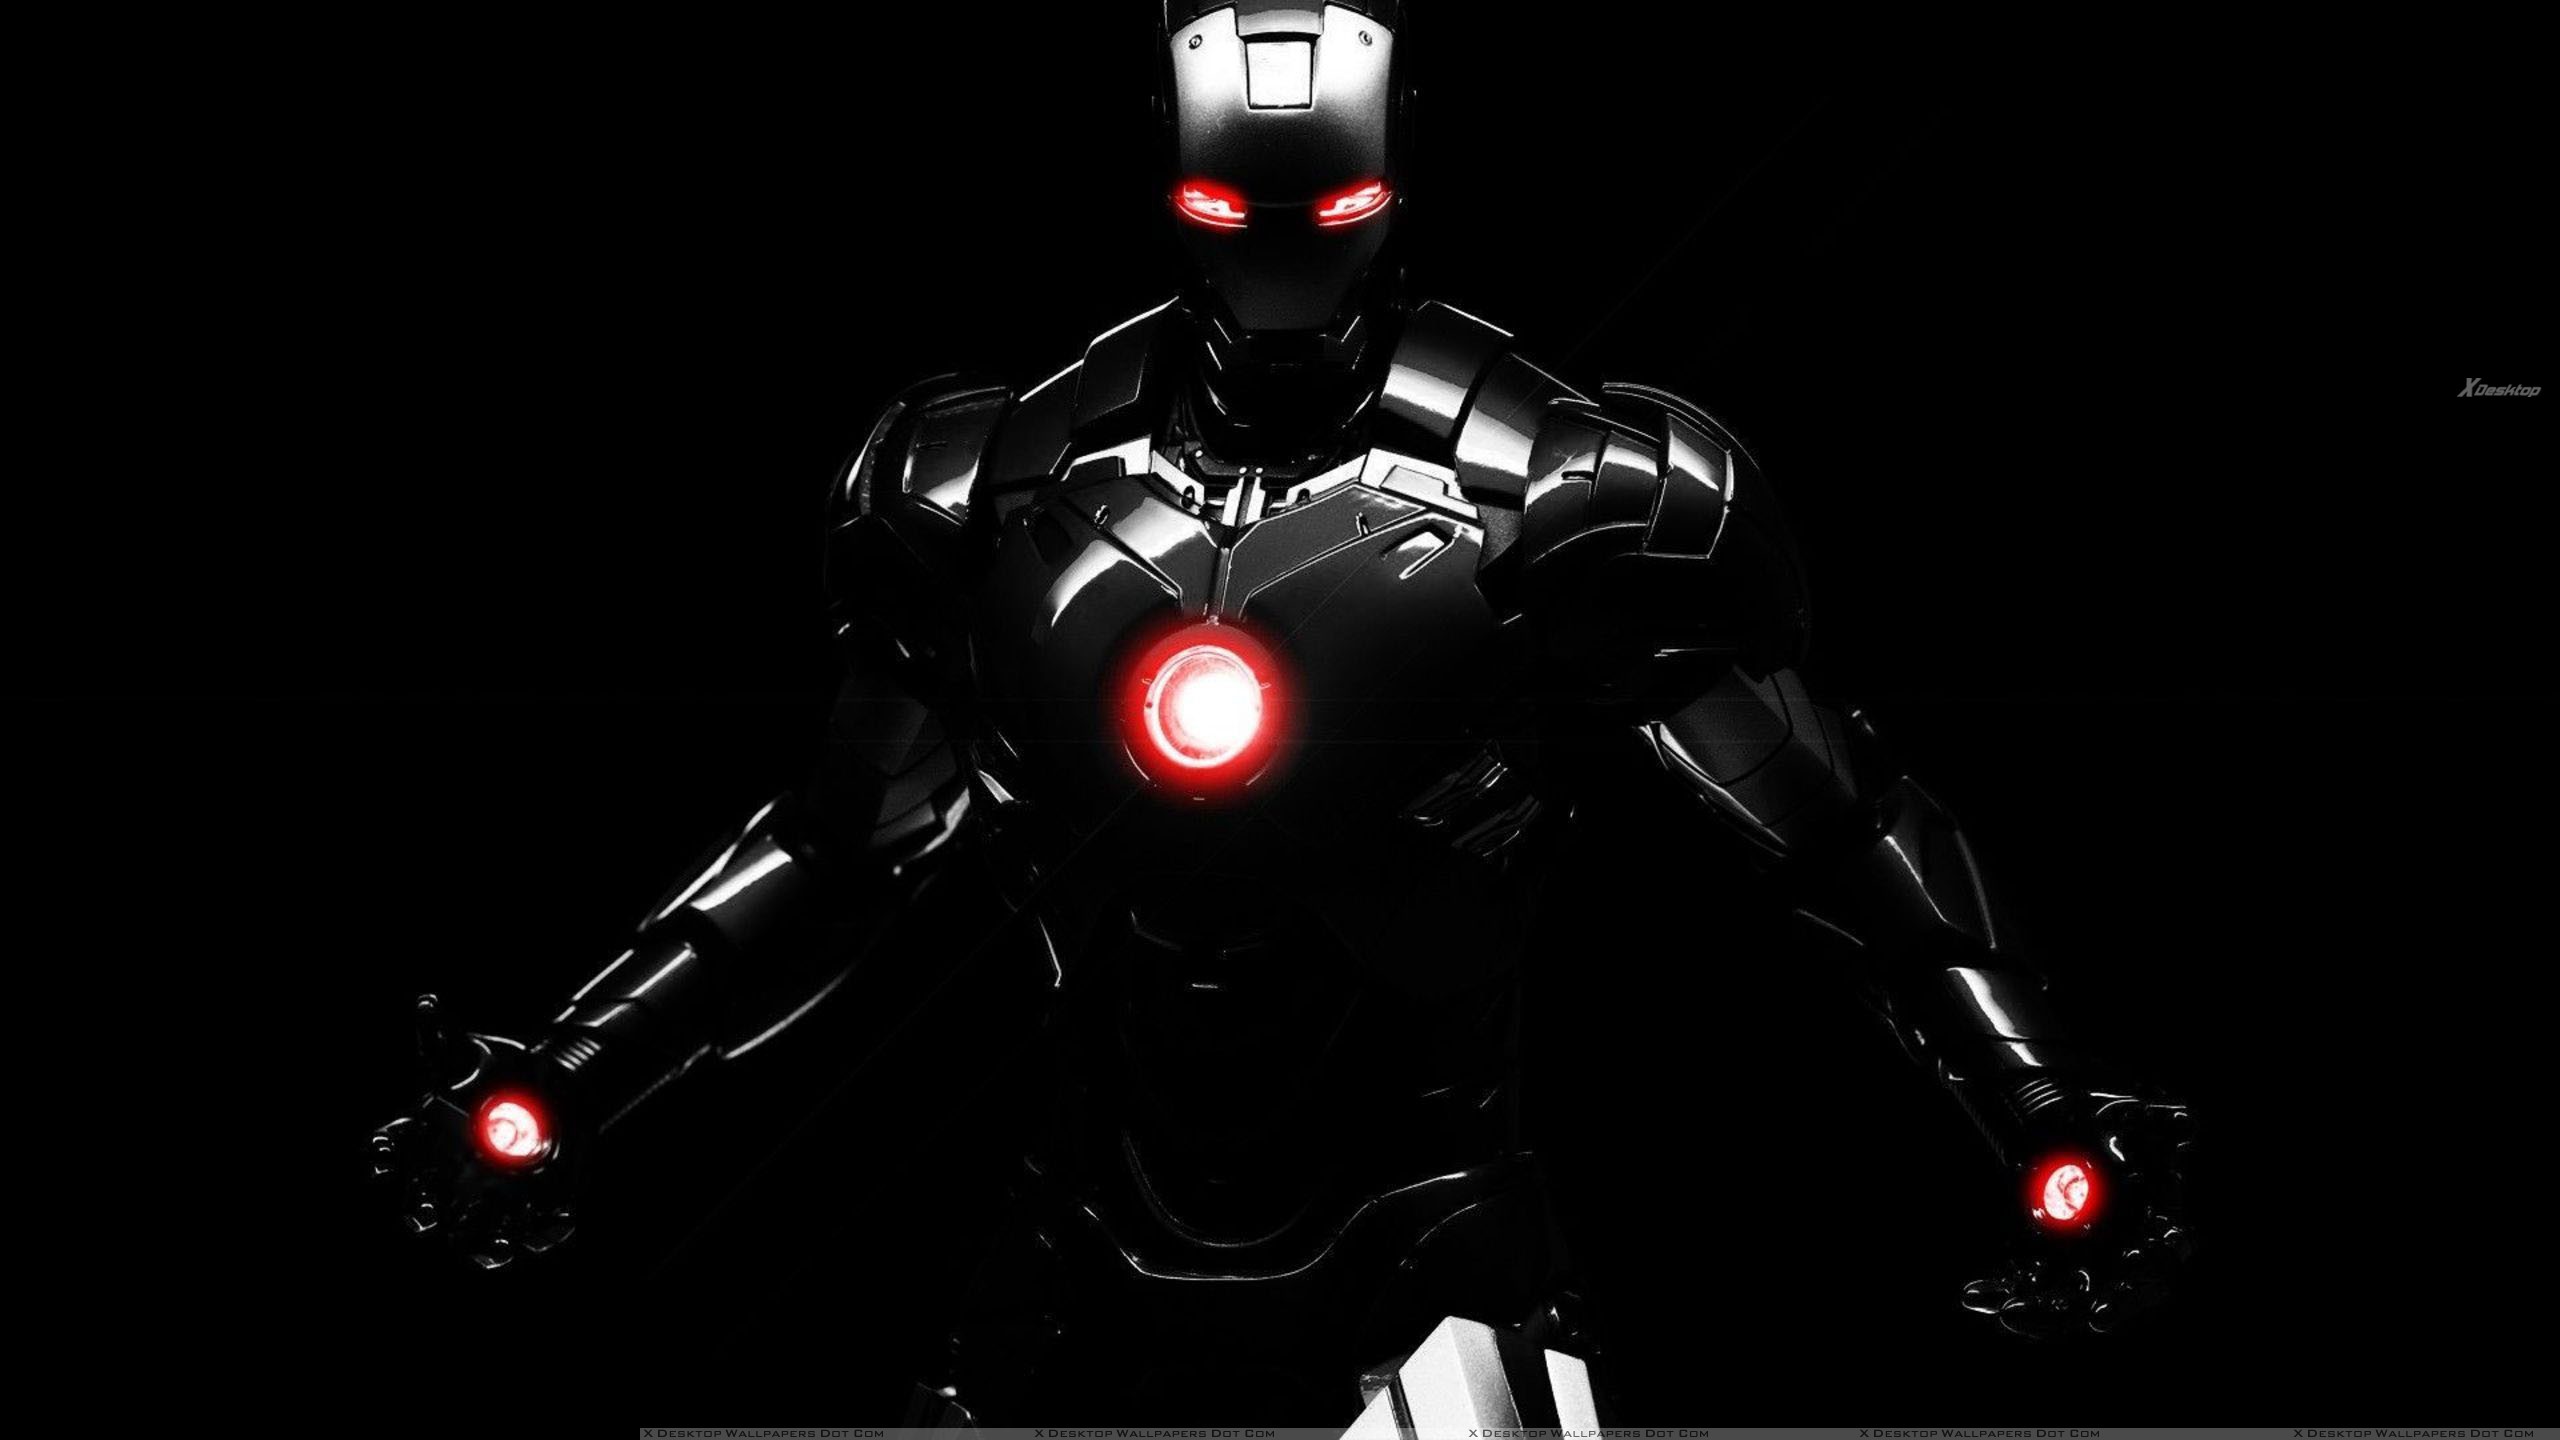 Iron Man Suit Wallpaper Image Amp Pictures Becuo